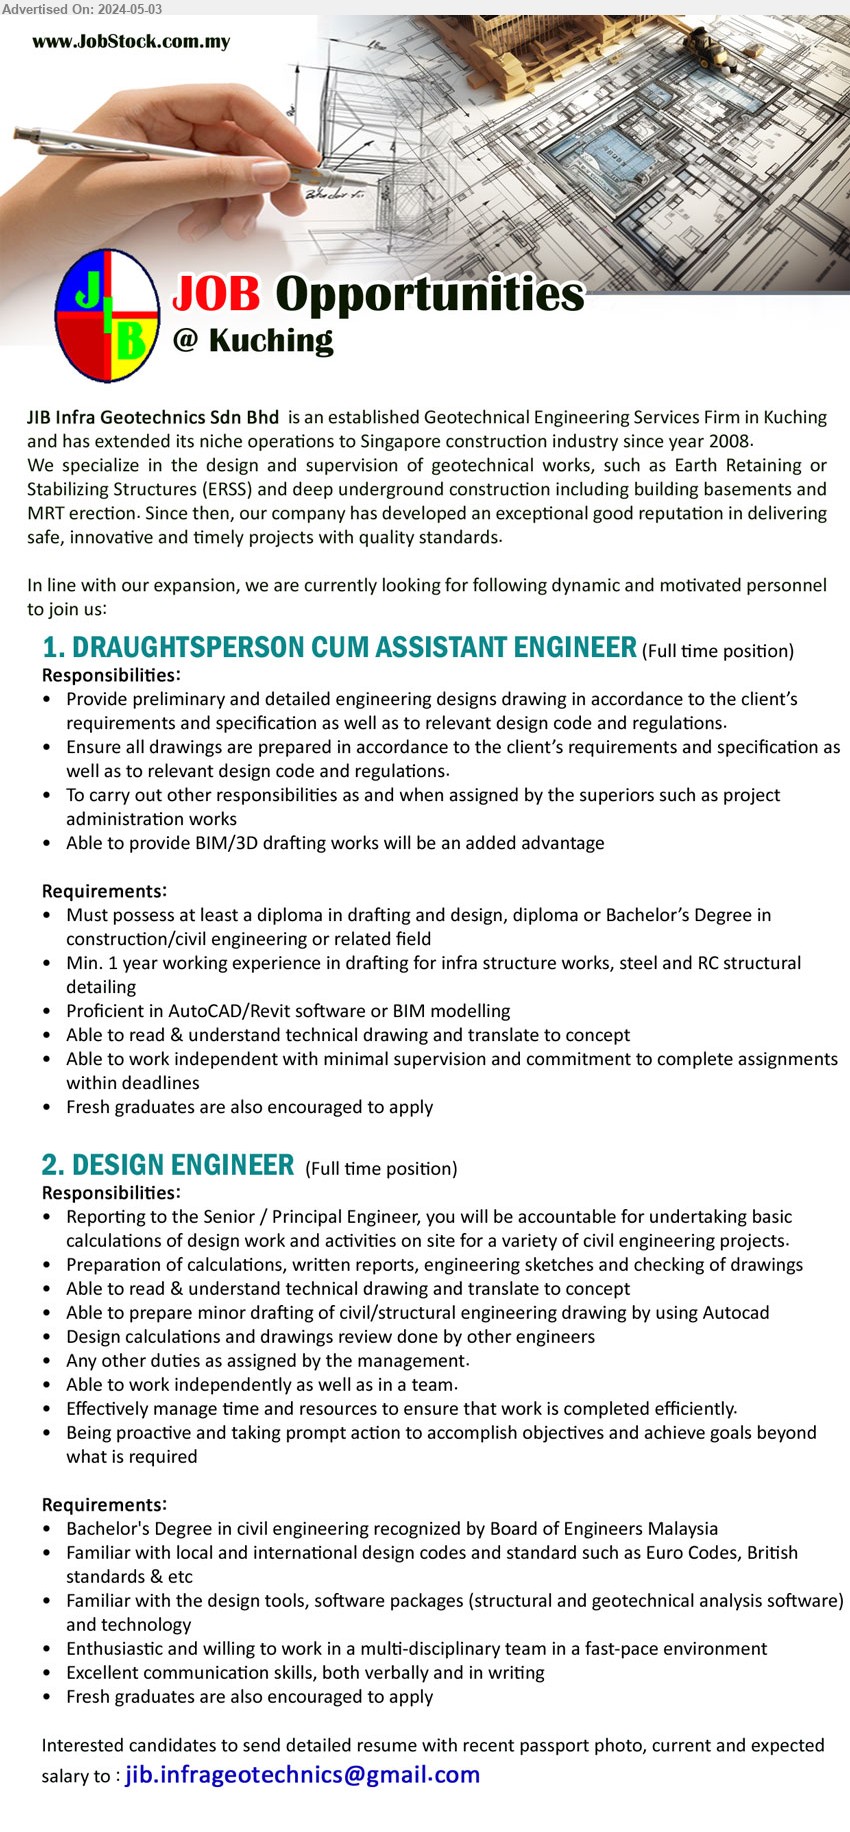 JIB INFRA GEOTECHNICS SDN BHD - 1. DRAUGHTSPERSON CUM ASSISTANT ENGINEER (Kuching), Diploma in Drafting and Design, Diploma or Bachelor’s Degree in 	
Construction/Civil Engineering,...
2. DESIGN ENGINEER (Kuching), Bachelor's Degree in Civil Engineering recognized by Board of Engineers Malaysia,...
Email resume to ...